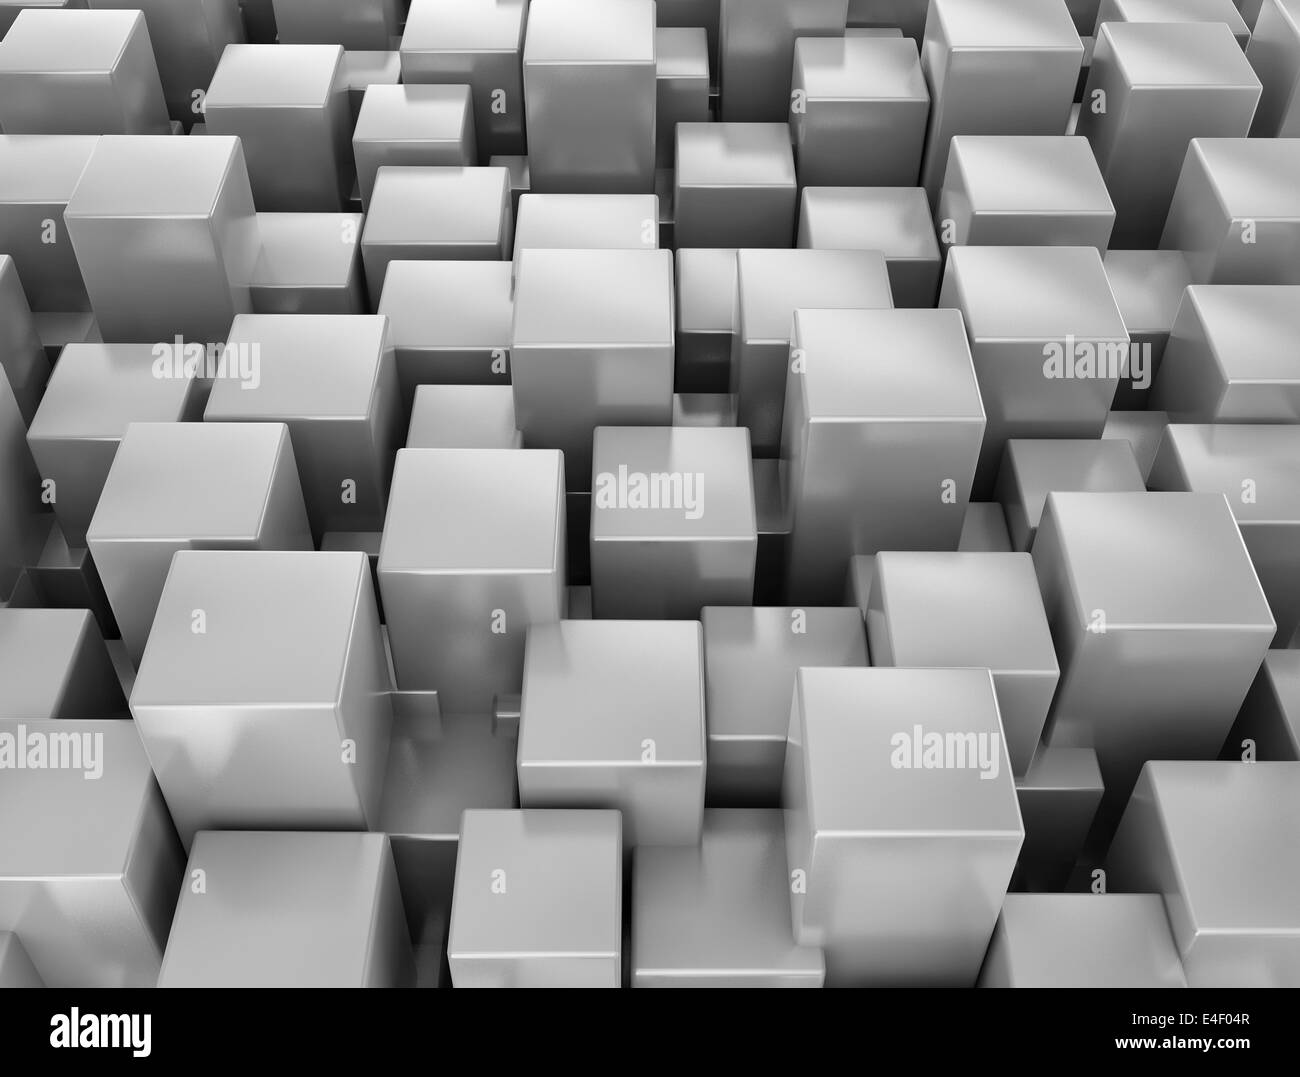 Abstract metallic 3d cubes background Stock Photo